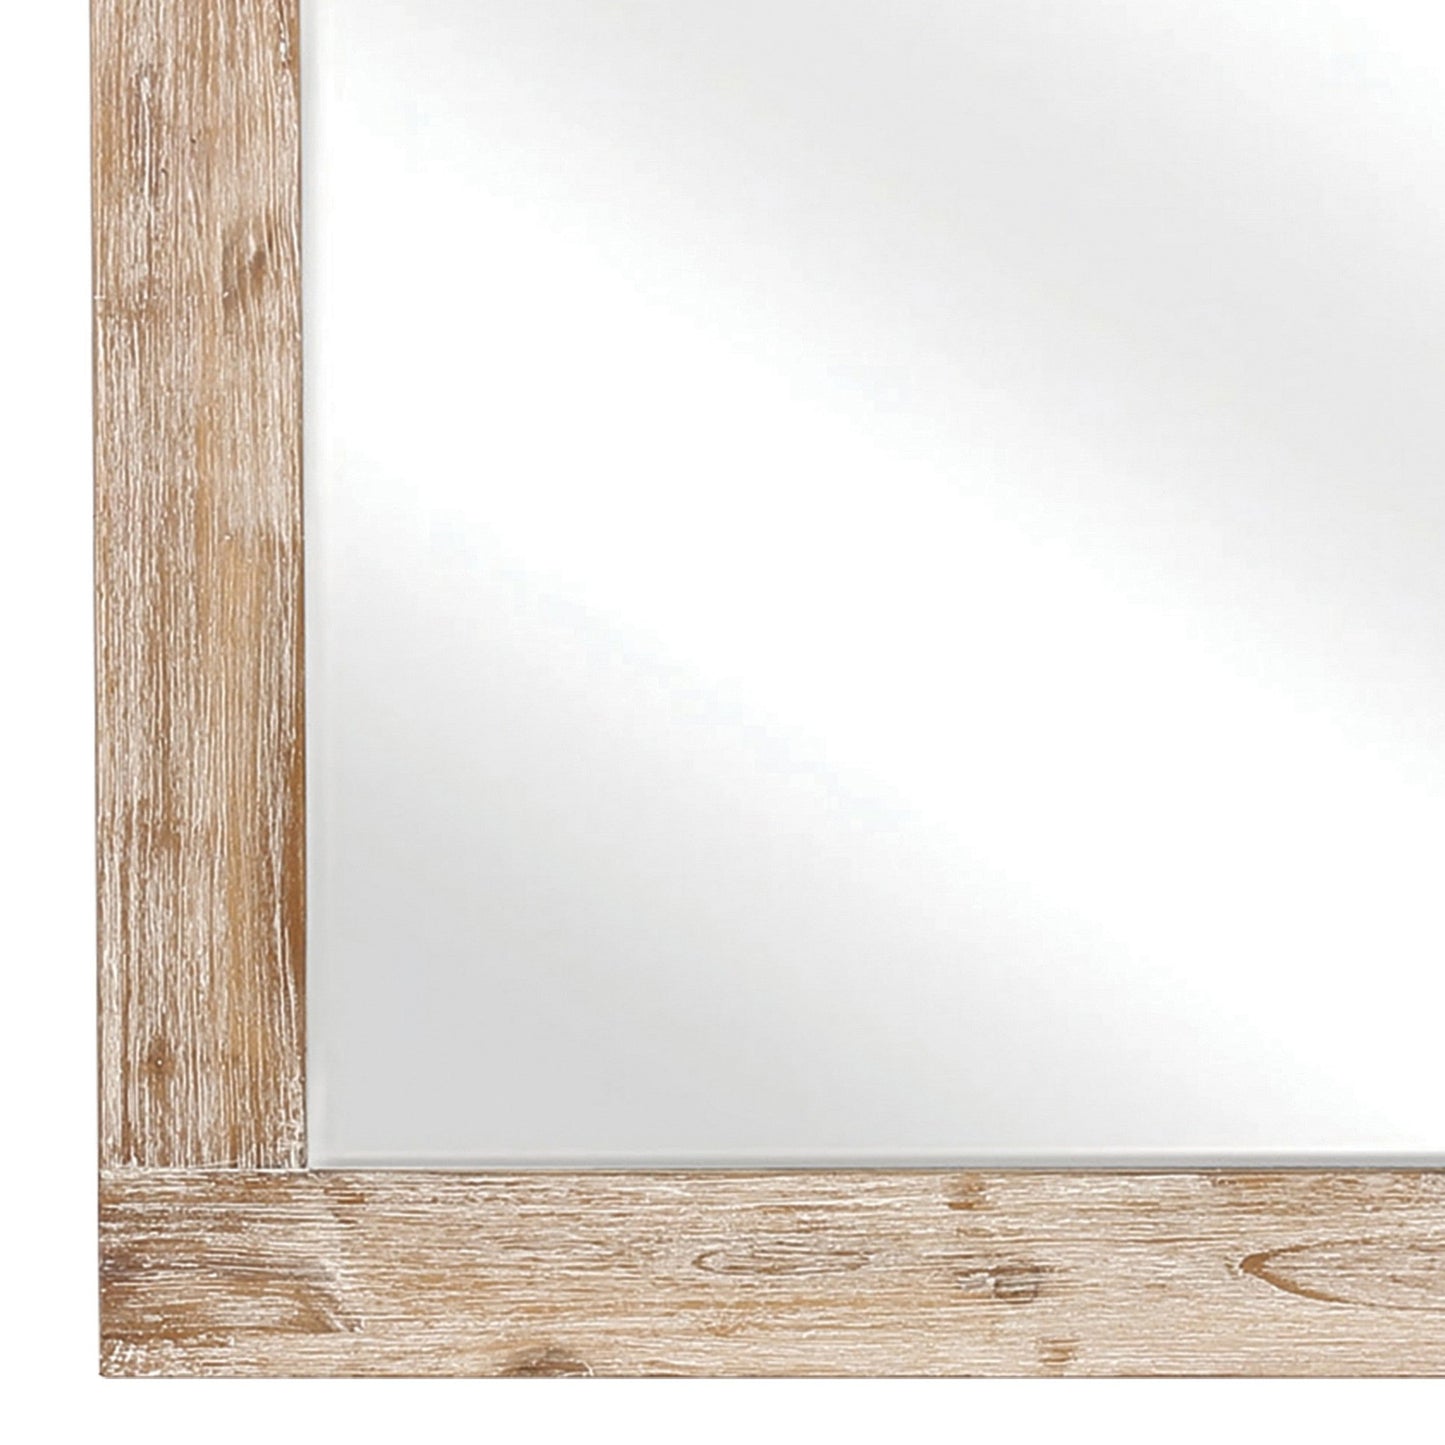 Benzara Square Light Brown Wooden Framed Wall Mirror With Hewn Saw Details